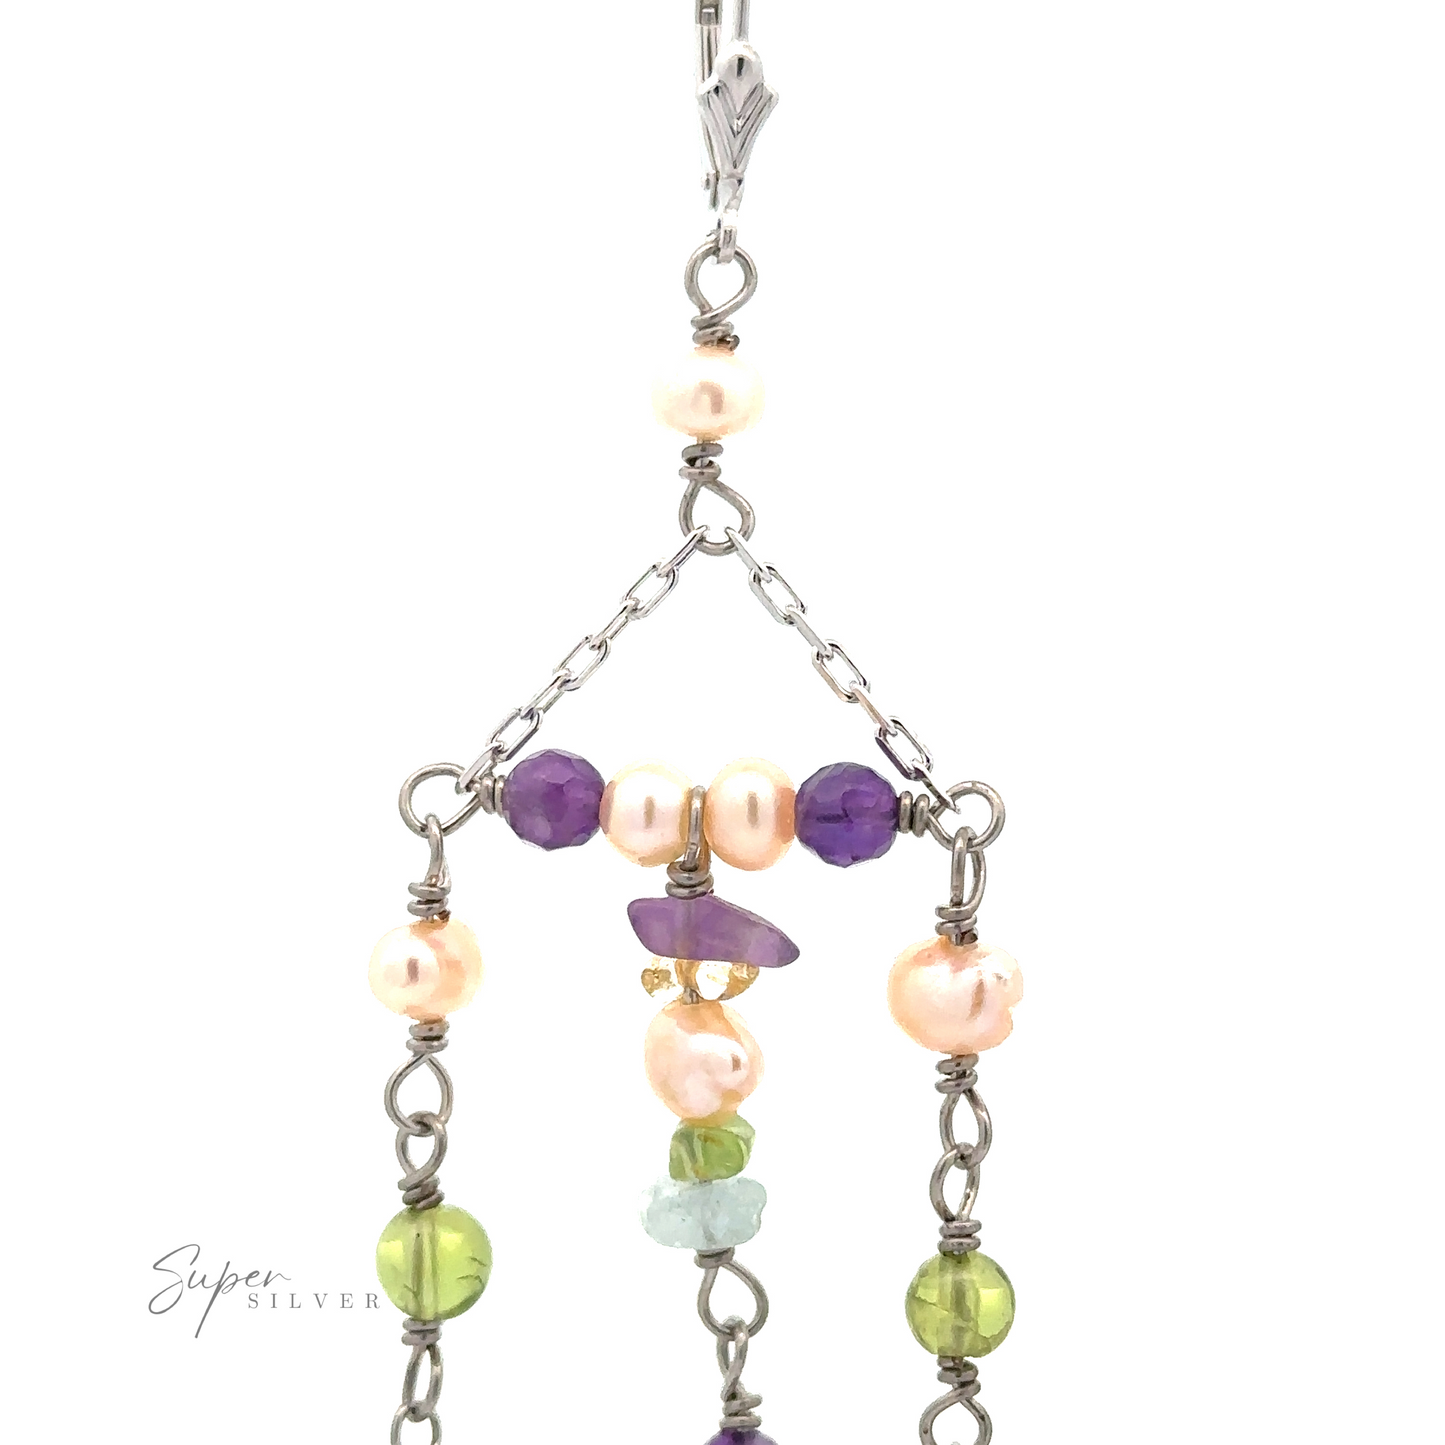 
                  
                    Dangly Multicolor Bead Earrings featuring a symmetrical design with pink pearls, multicolor beads in purple and green, and sterling silver chain links. Label "Super Silver" is visible at the bottom left.
                  
                